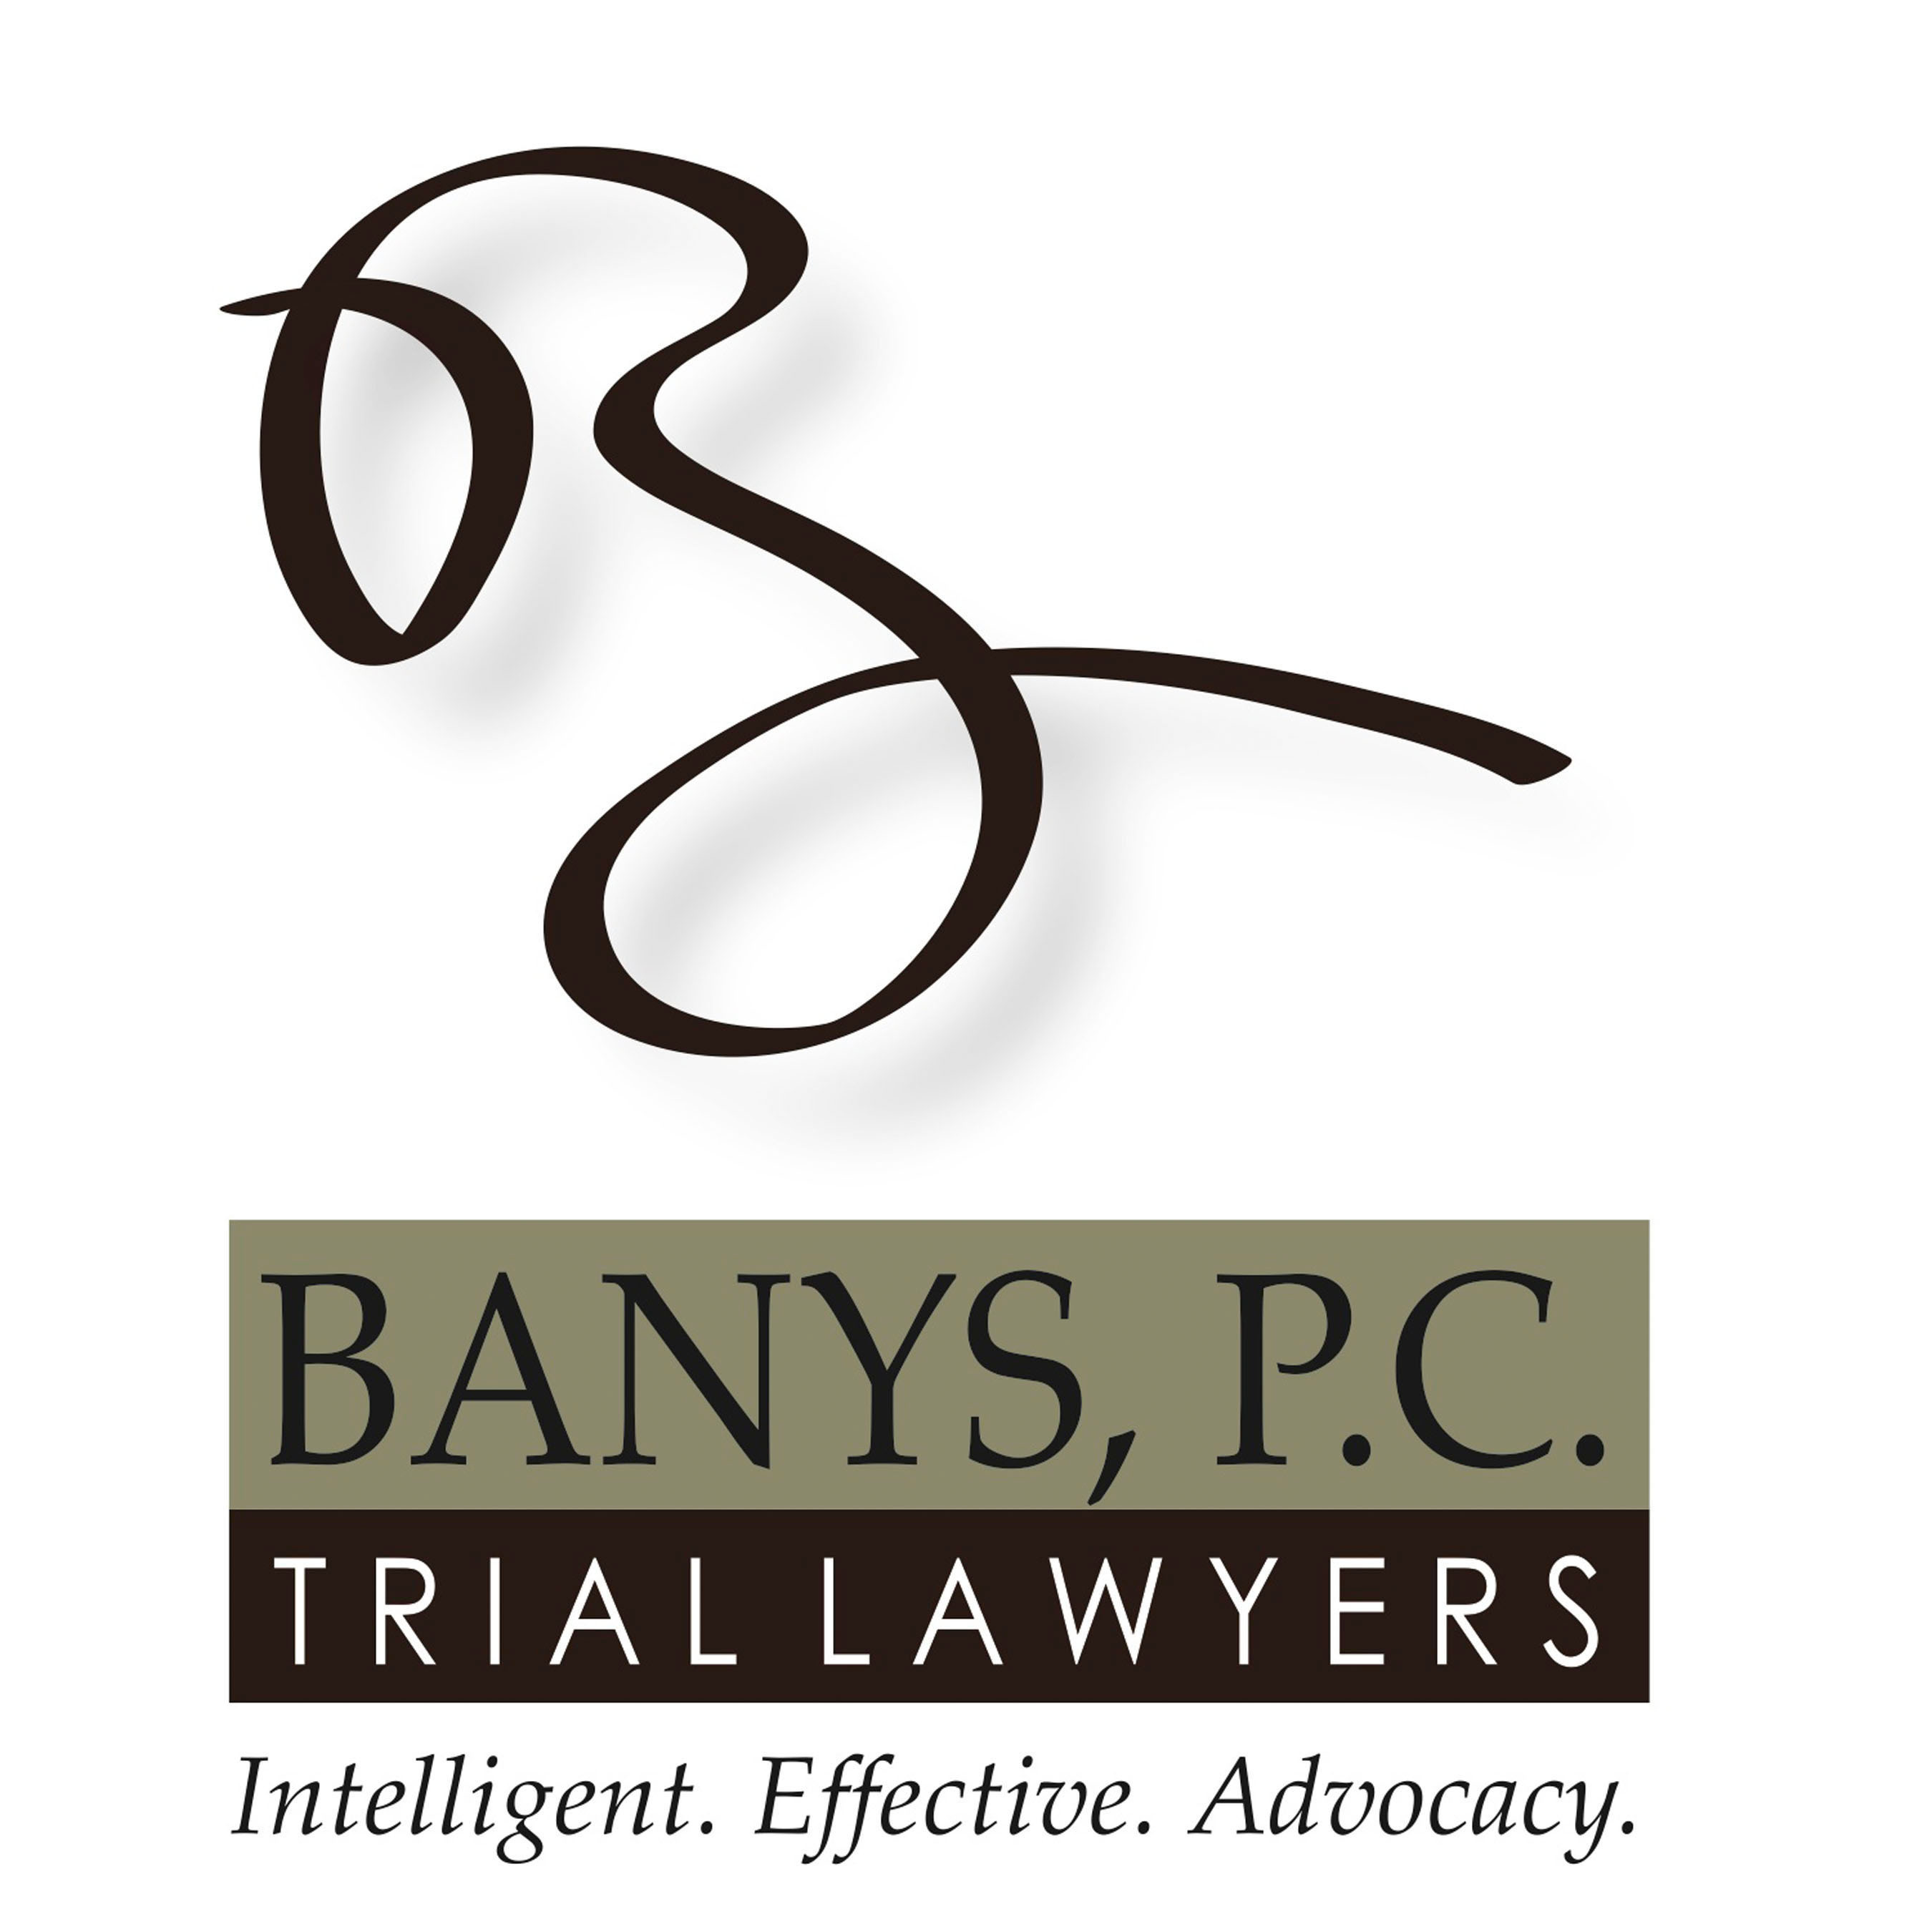 Banys, P.C. is a team of trial lawyers dedicated to getting results for its clients. The firm brings intelligent, effective advocacy to courtrooms around the nation in intellectual property, commercial, personal injury and class action cases. For more information visit www.banyspc.com.